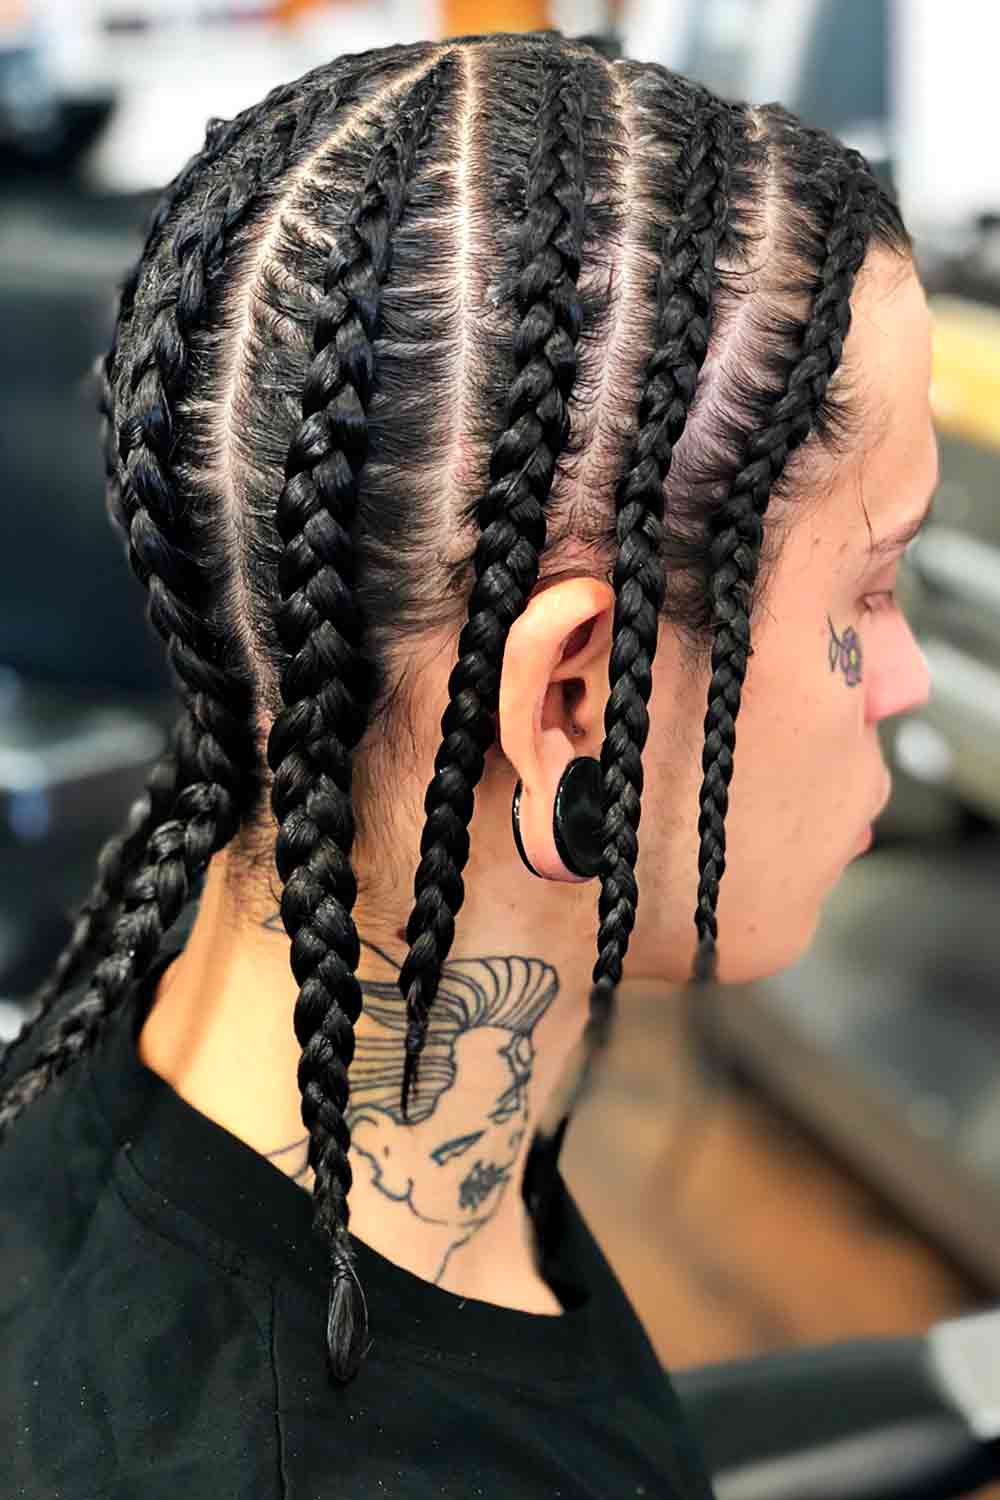 Little Boys Braided Hairstyles, Adorable Box Braid Hairstyles For 7  Year-Olds.